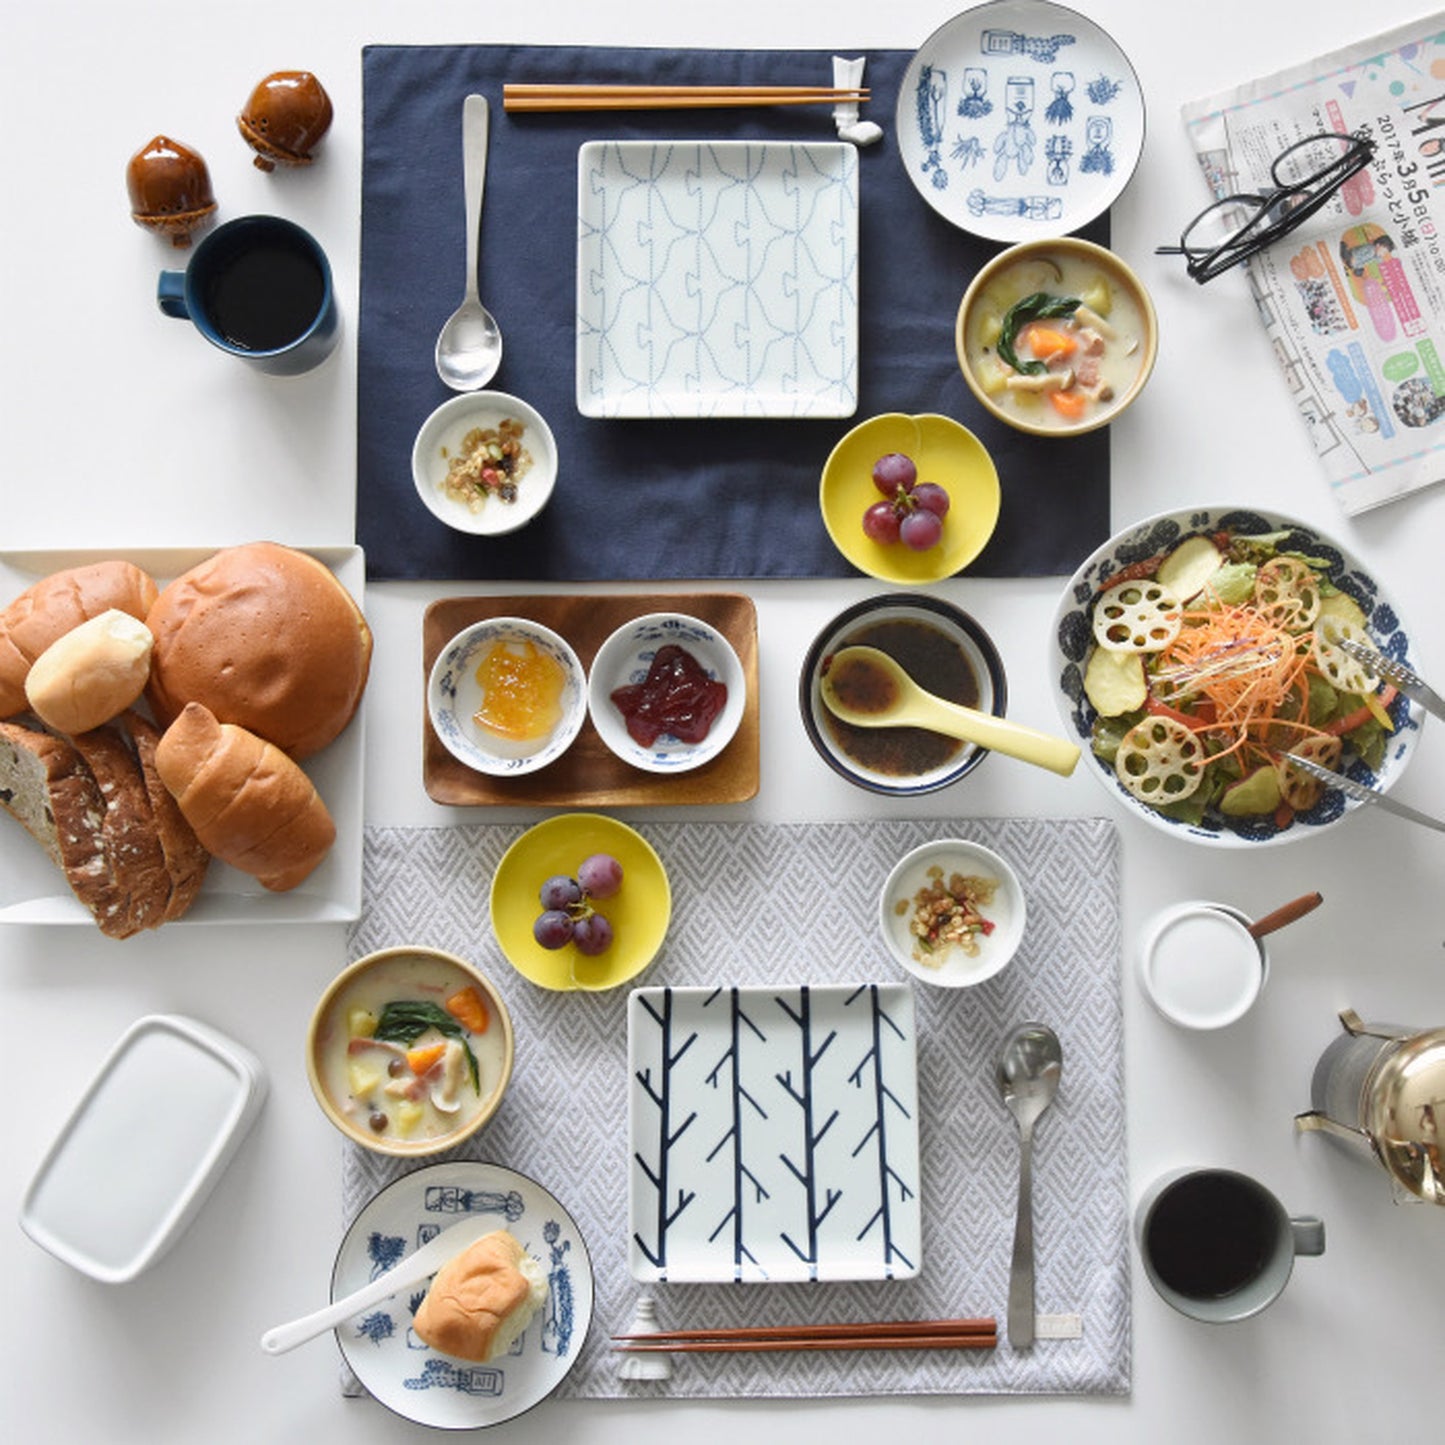 [Hasami ware] [natural69] [SWATCH] [Square plate] Square plate Bread plate Tableware Nordic fashionable